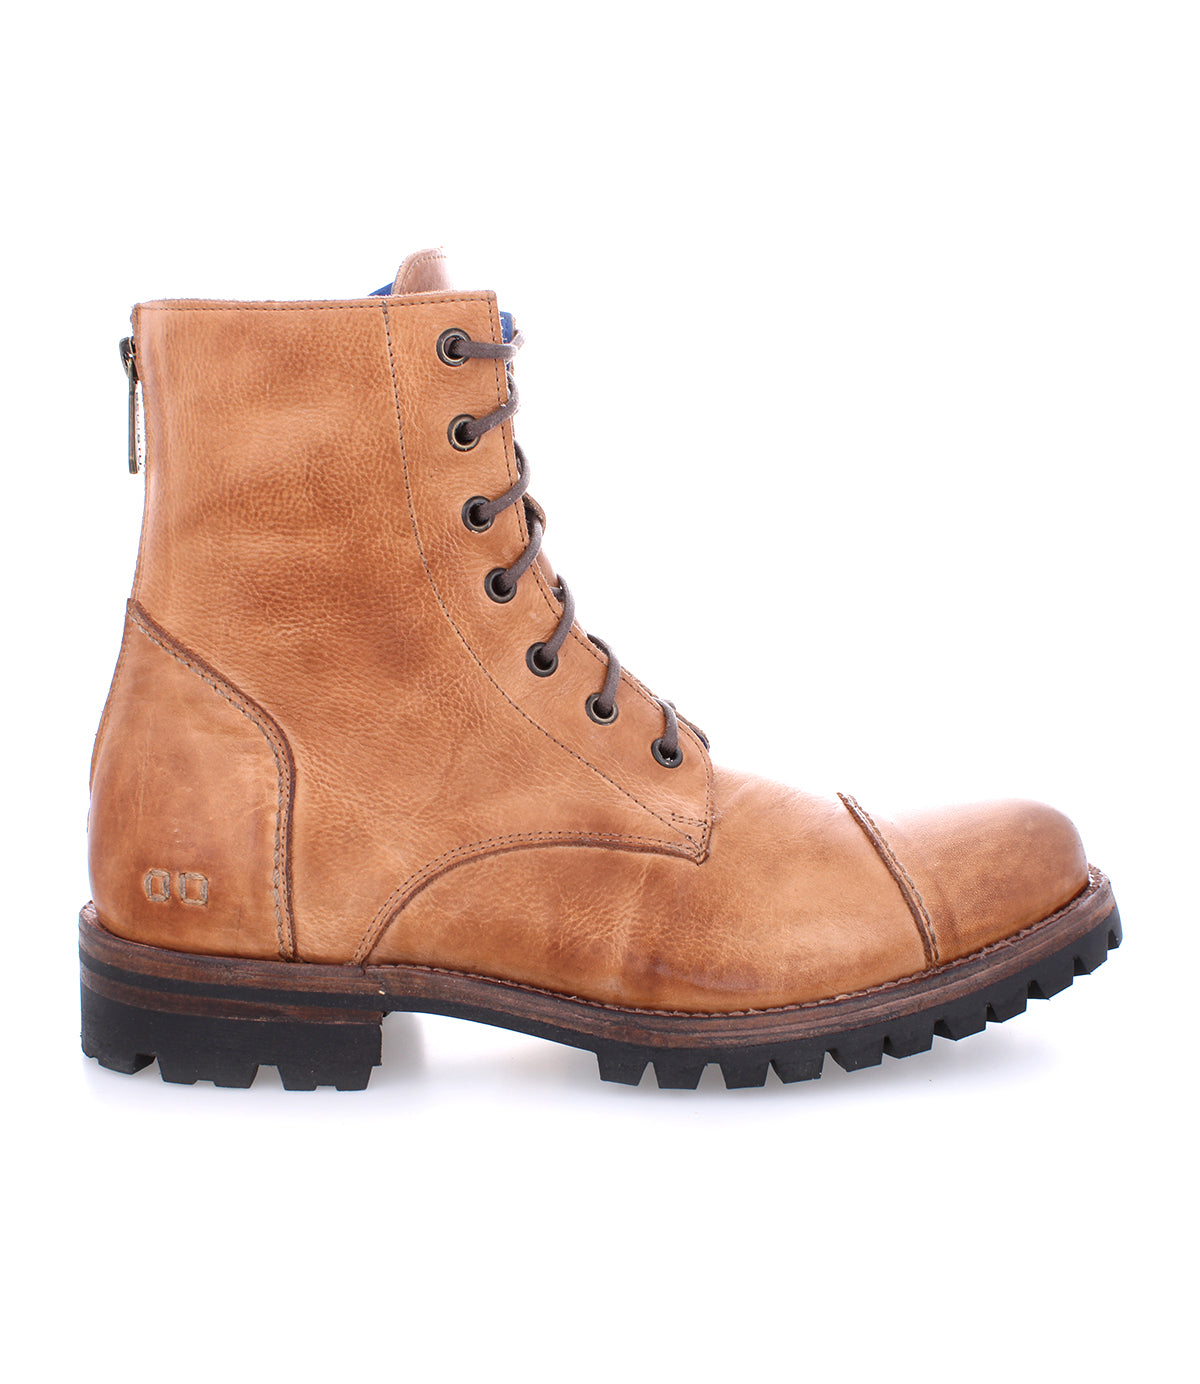 A single brown leather Protege Trek combat style boot with laces on a white background by Bed Stu.